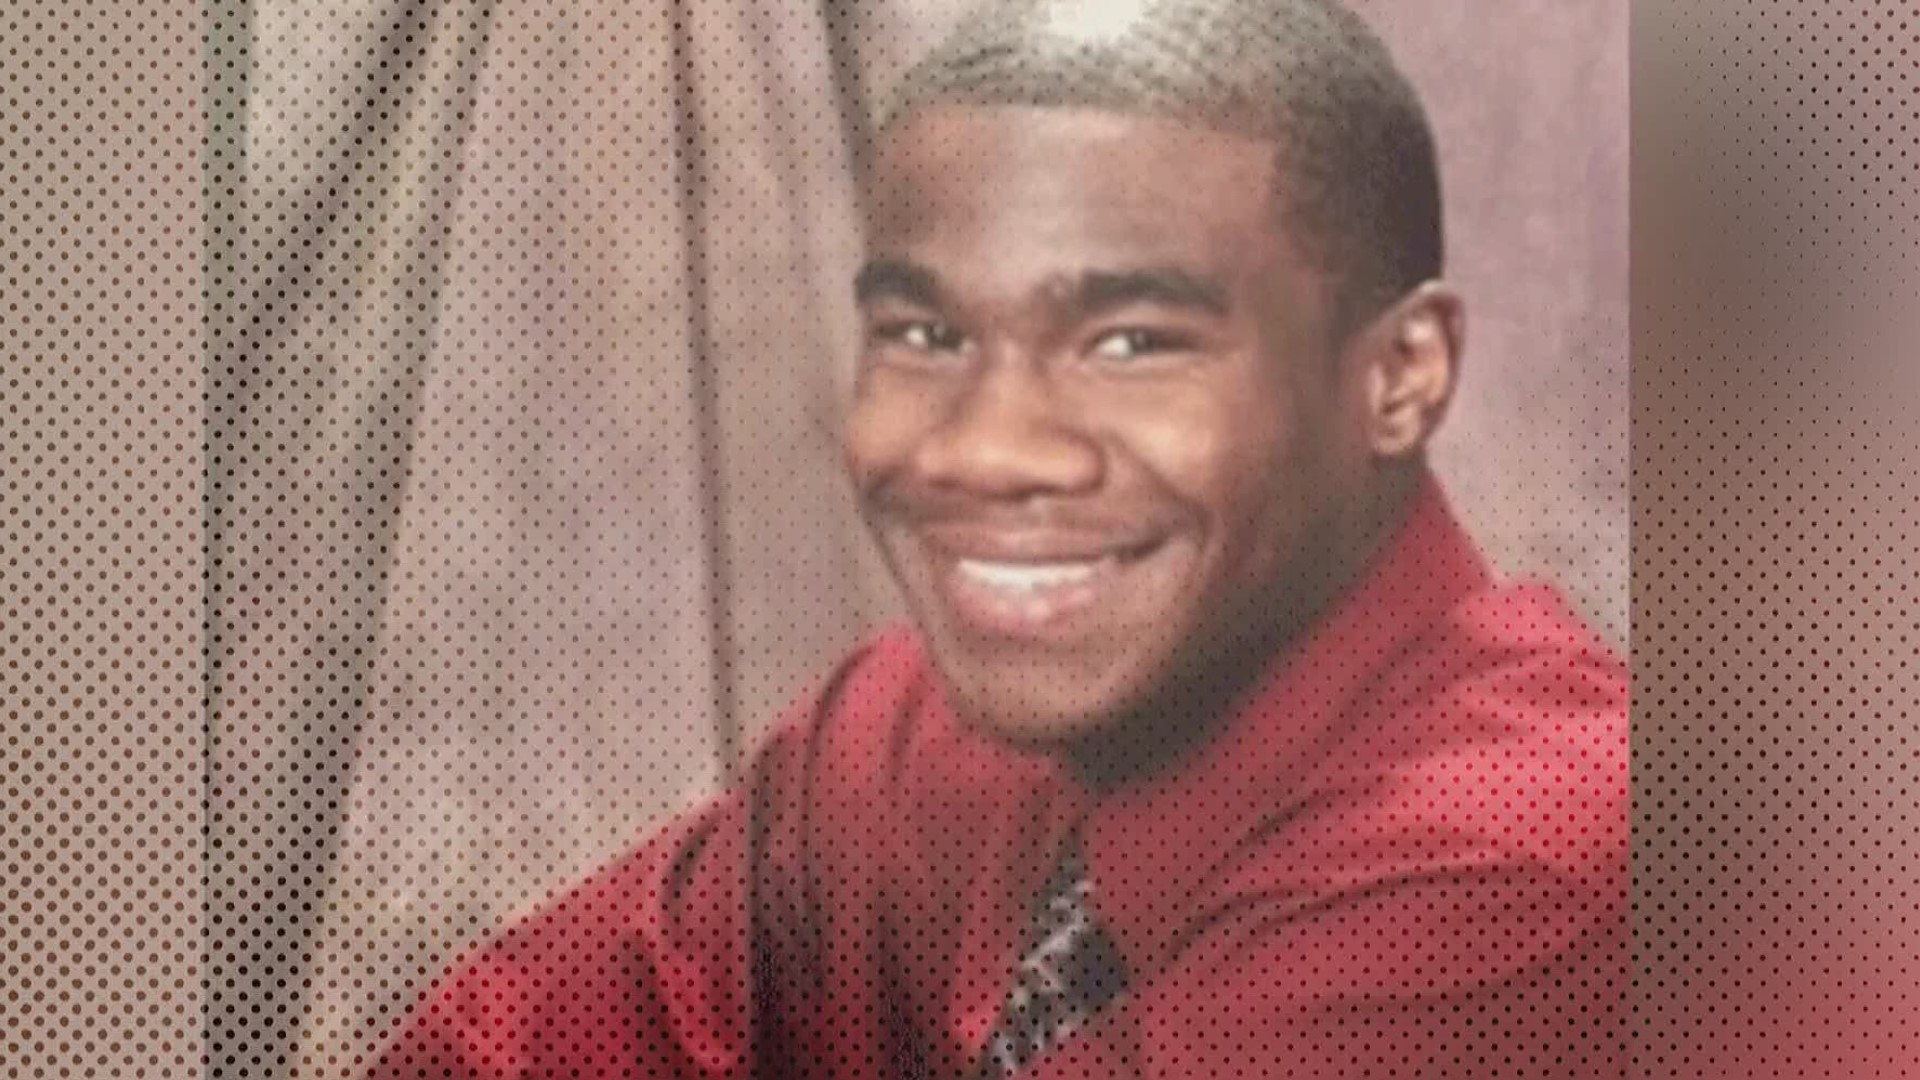 More than five years have passed since Jamarion Robinson was shot 59 times by law enforcement. He did not survive.